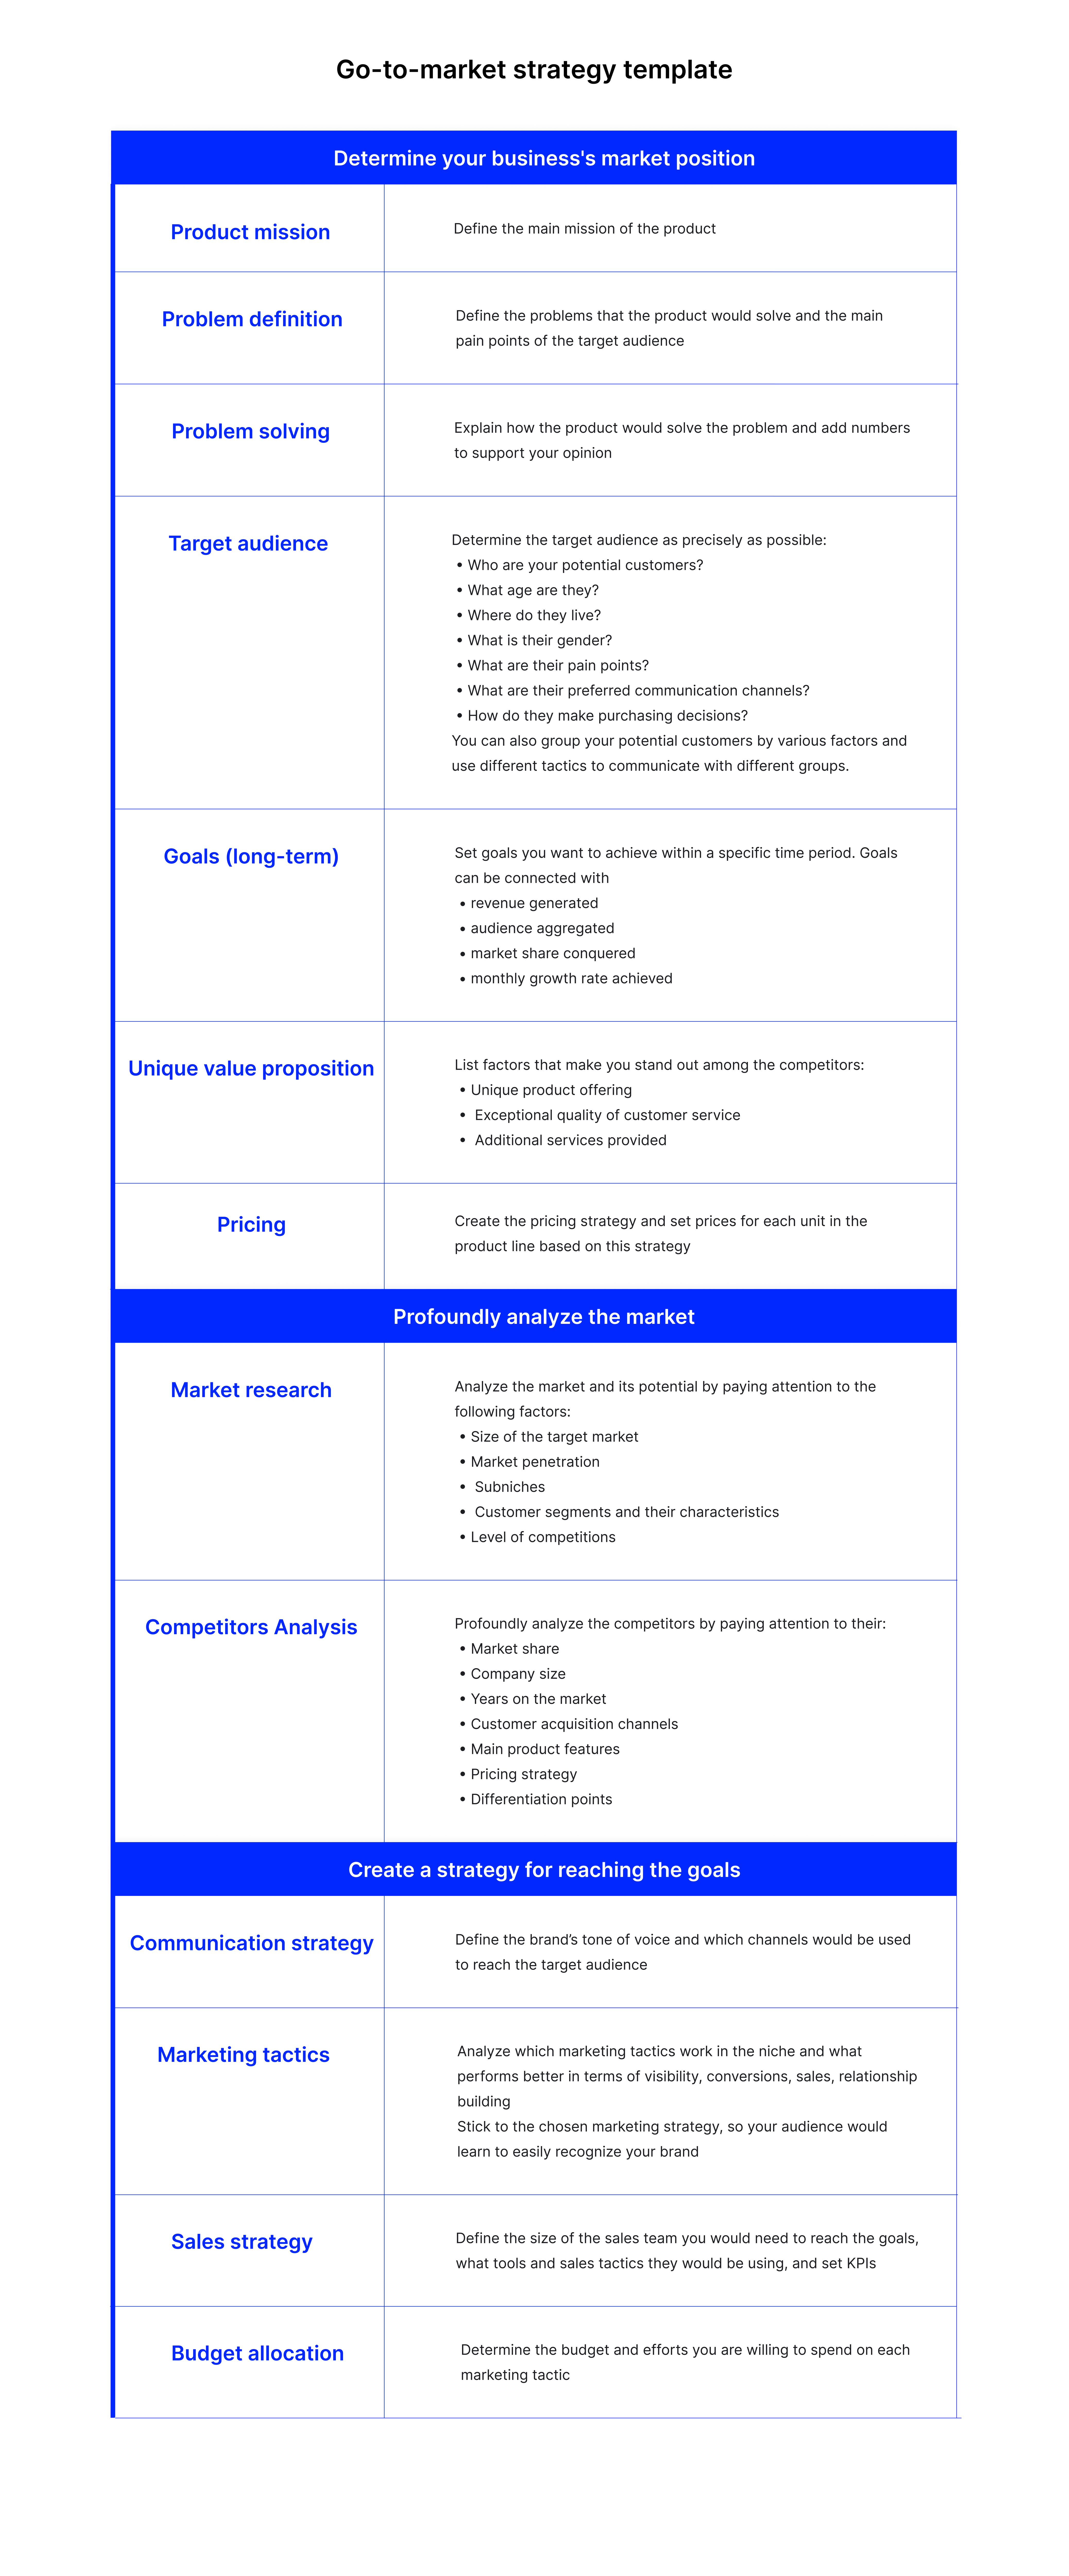 go-to-market strategy template